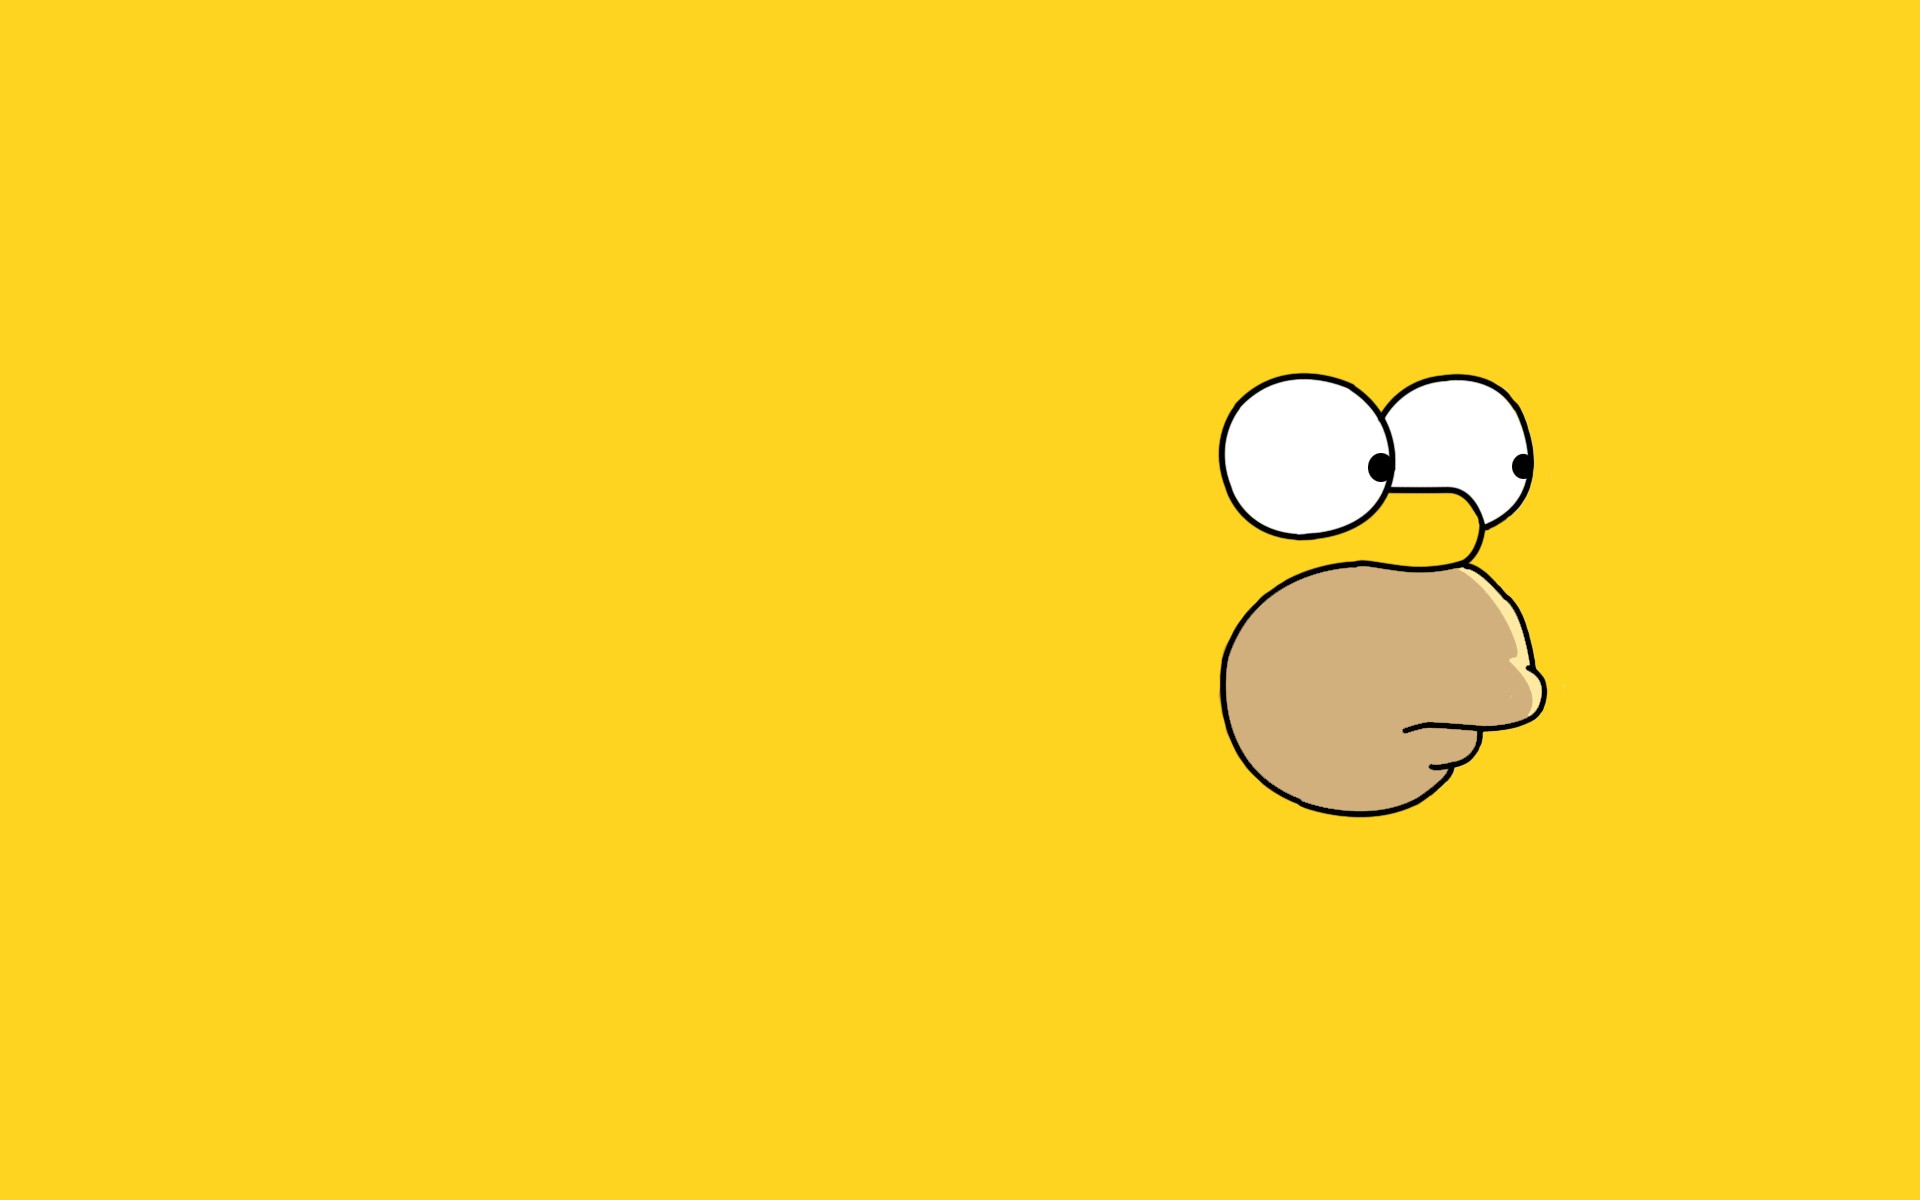 The simpsons hd wallpaper